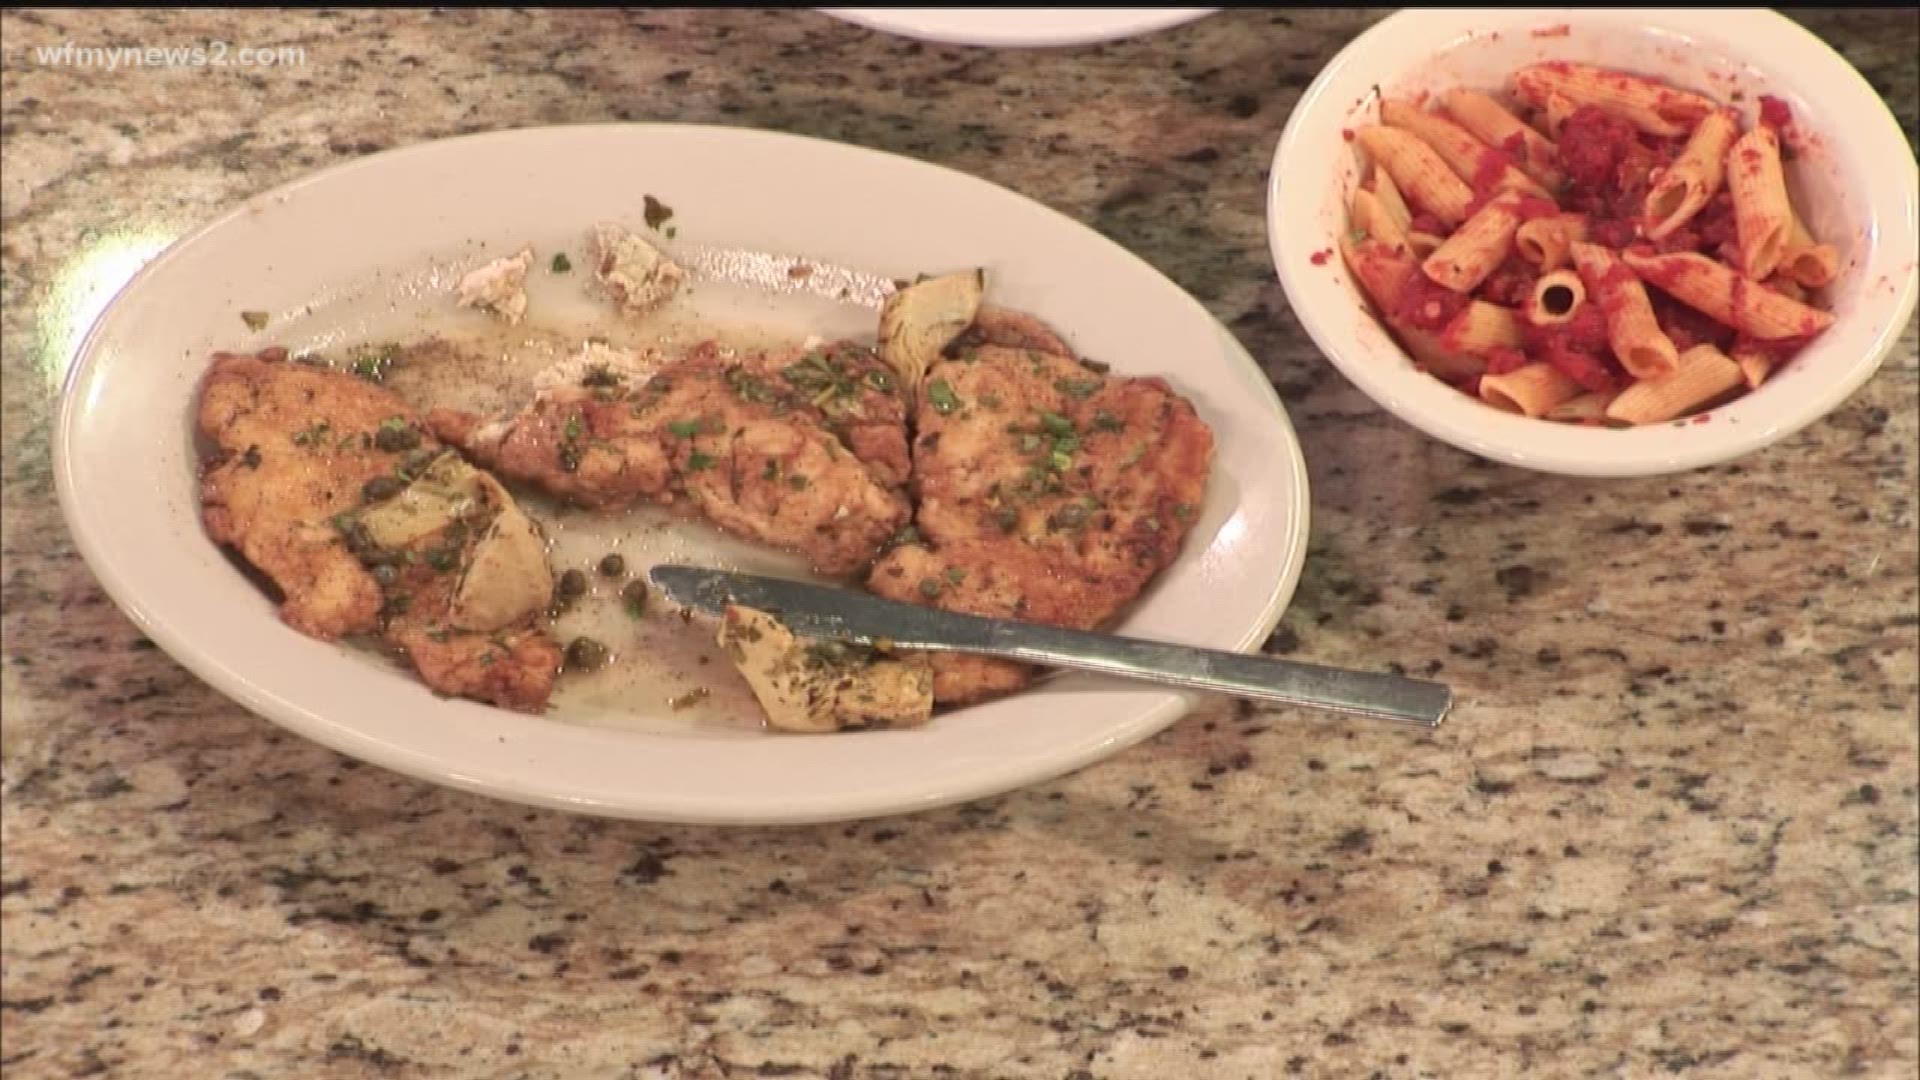 Chef Edona Pacolli is joining us in the News 2 Kitchen.